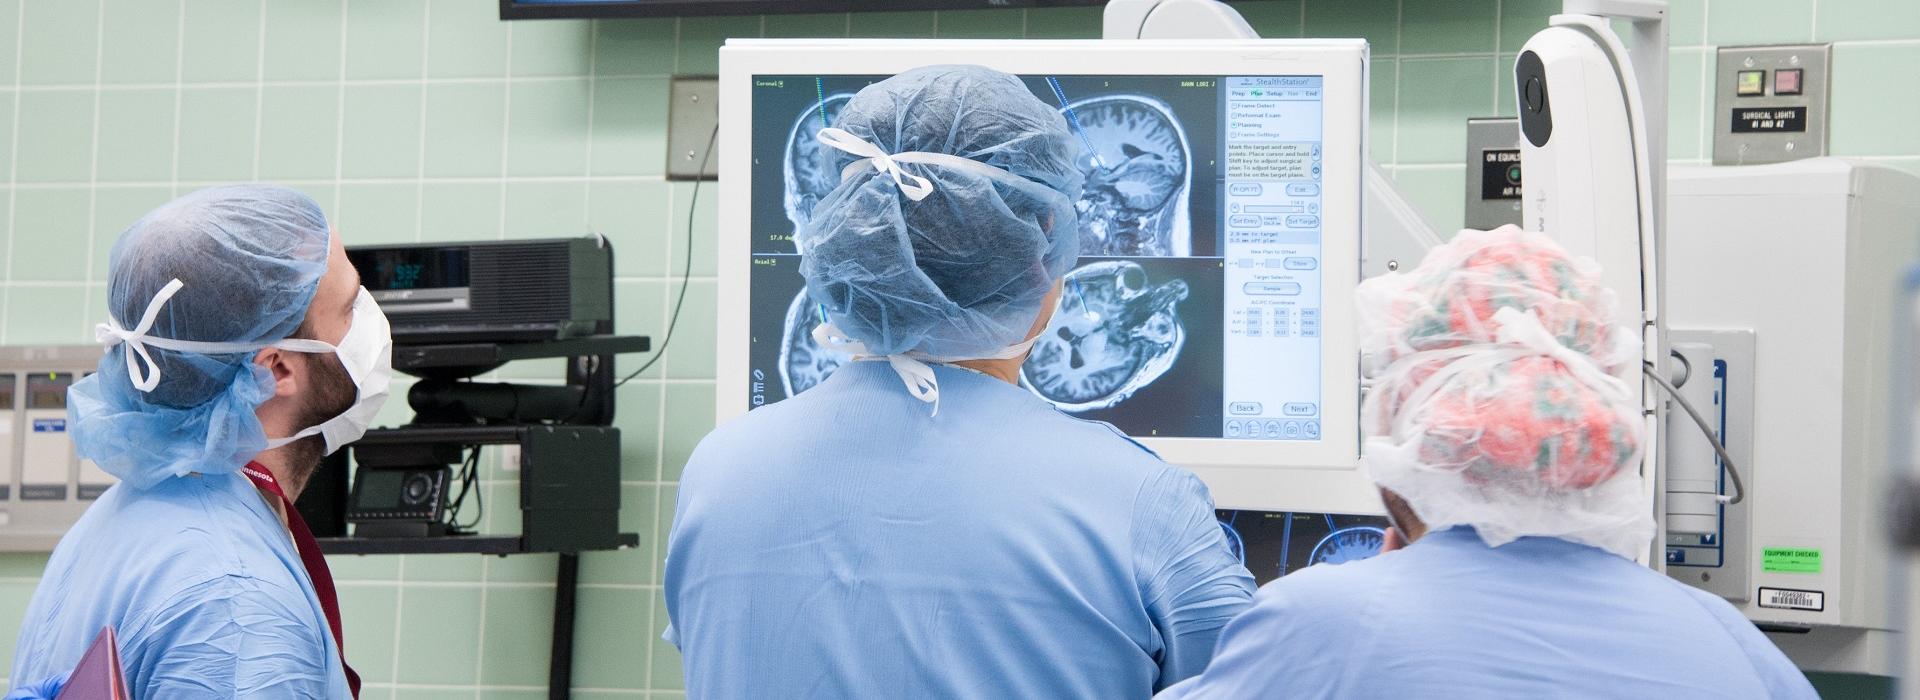 Viewing images in the OR